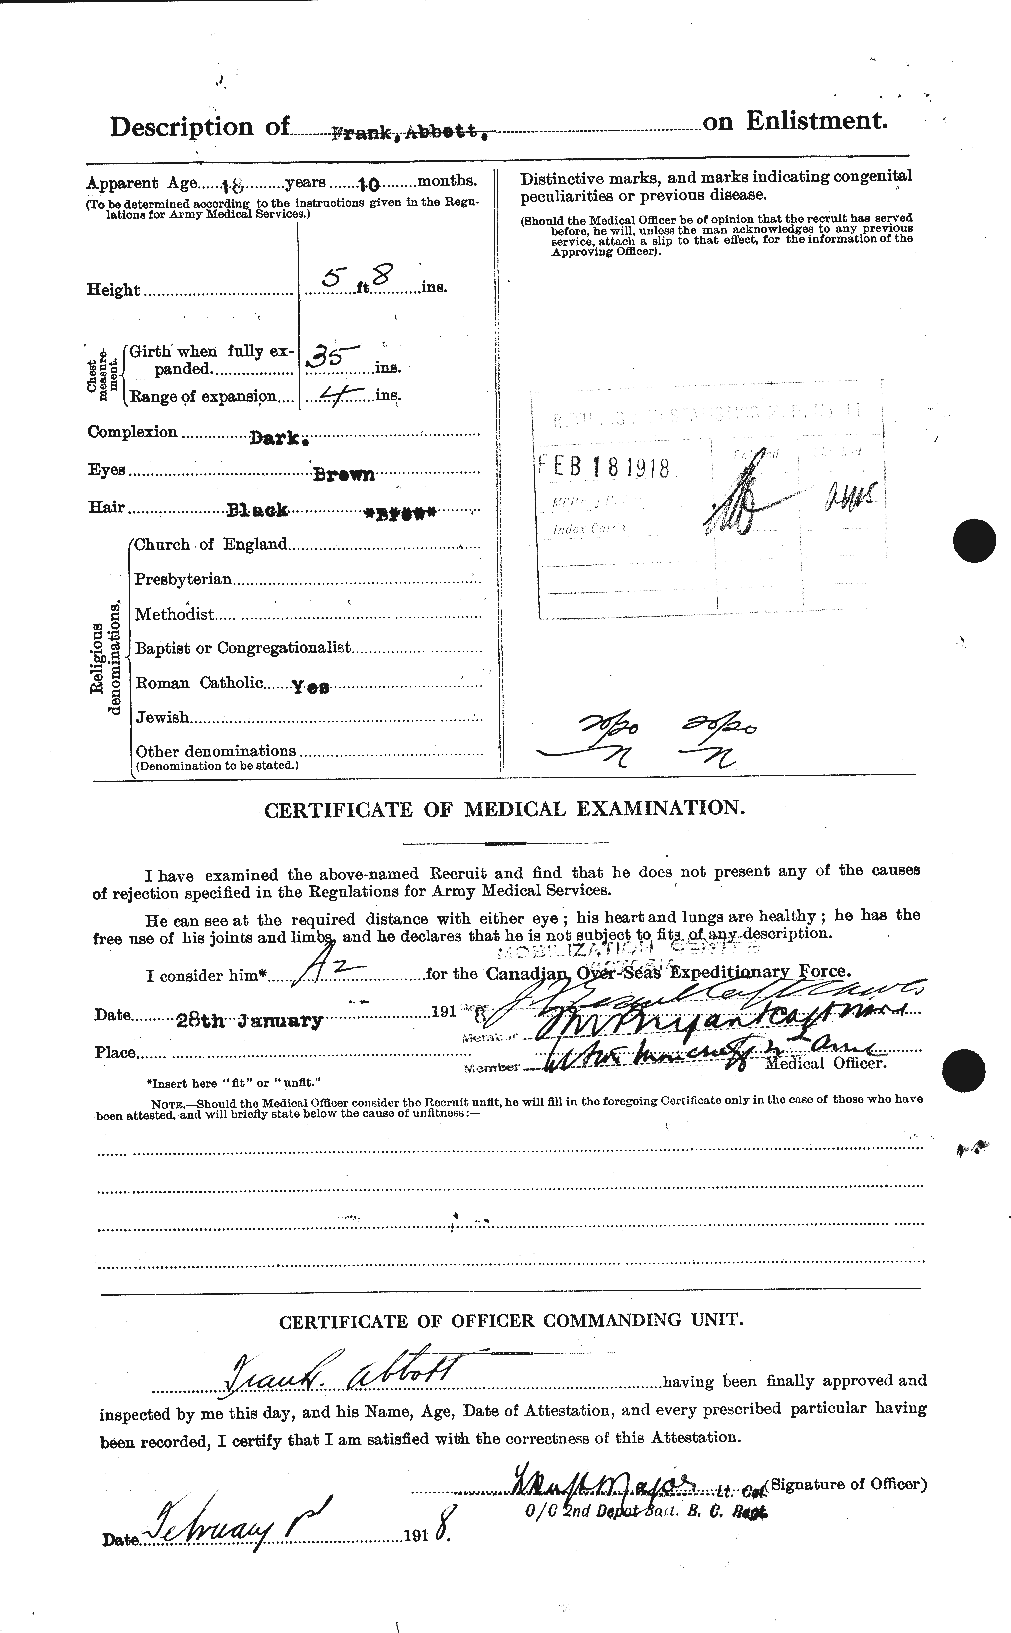 Personnel Records of the First World War - CEF 200915b